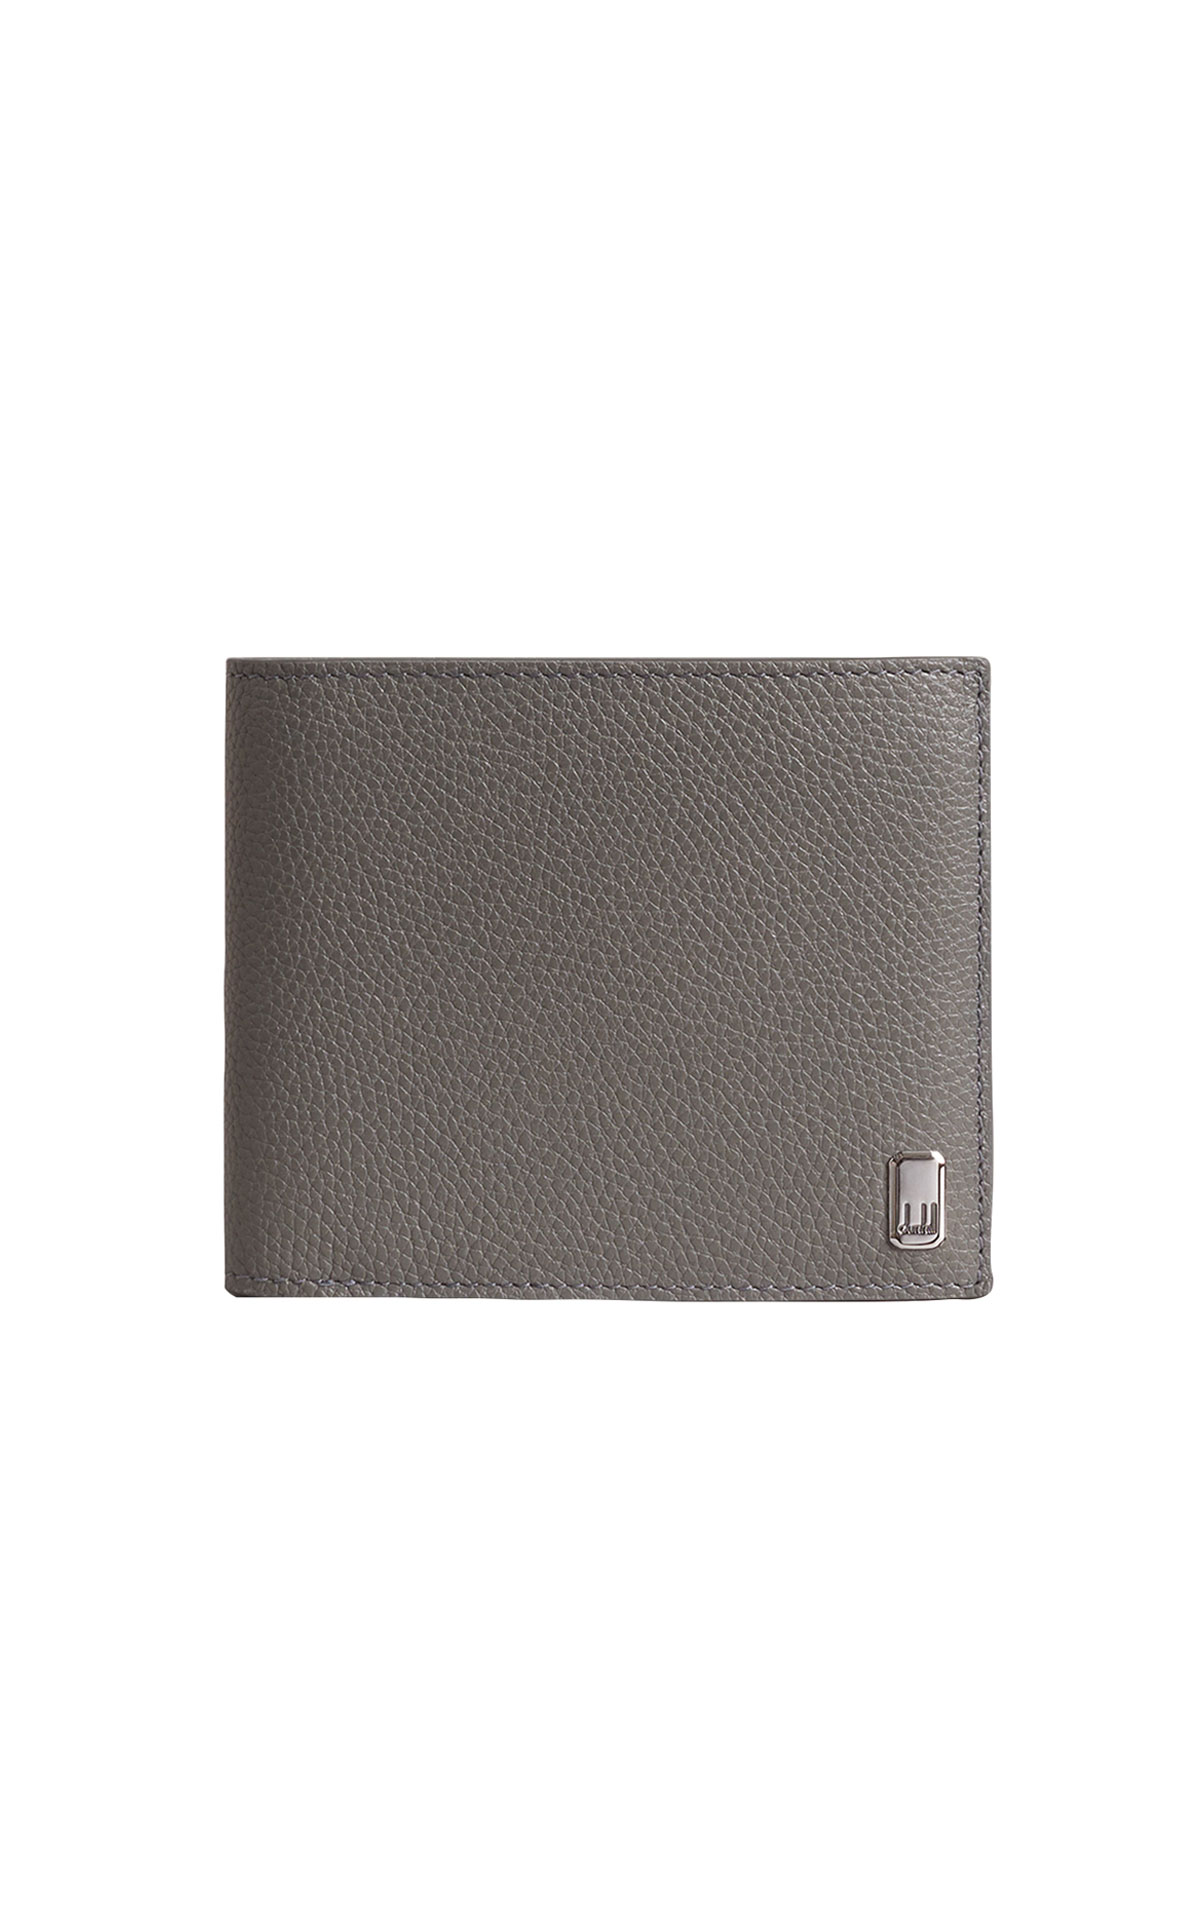 Dunhill Belgrave billfold leather wallet from Bicester Village